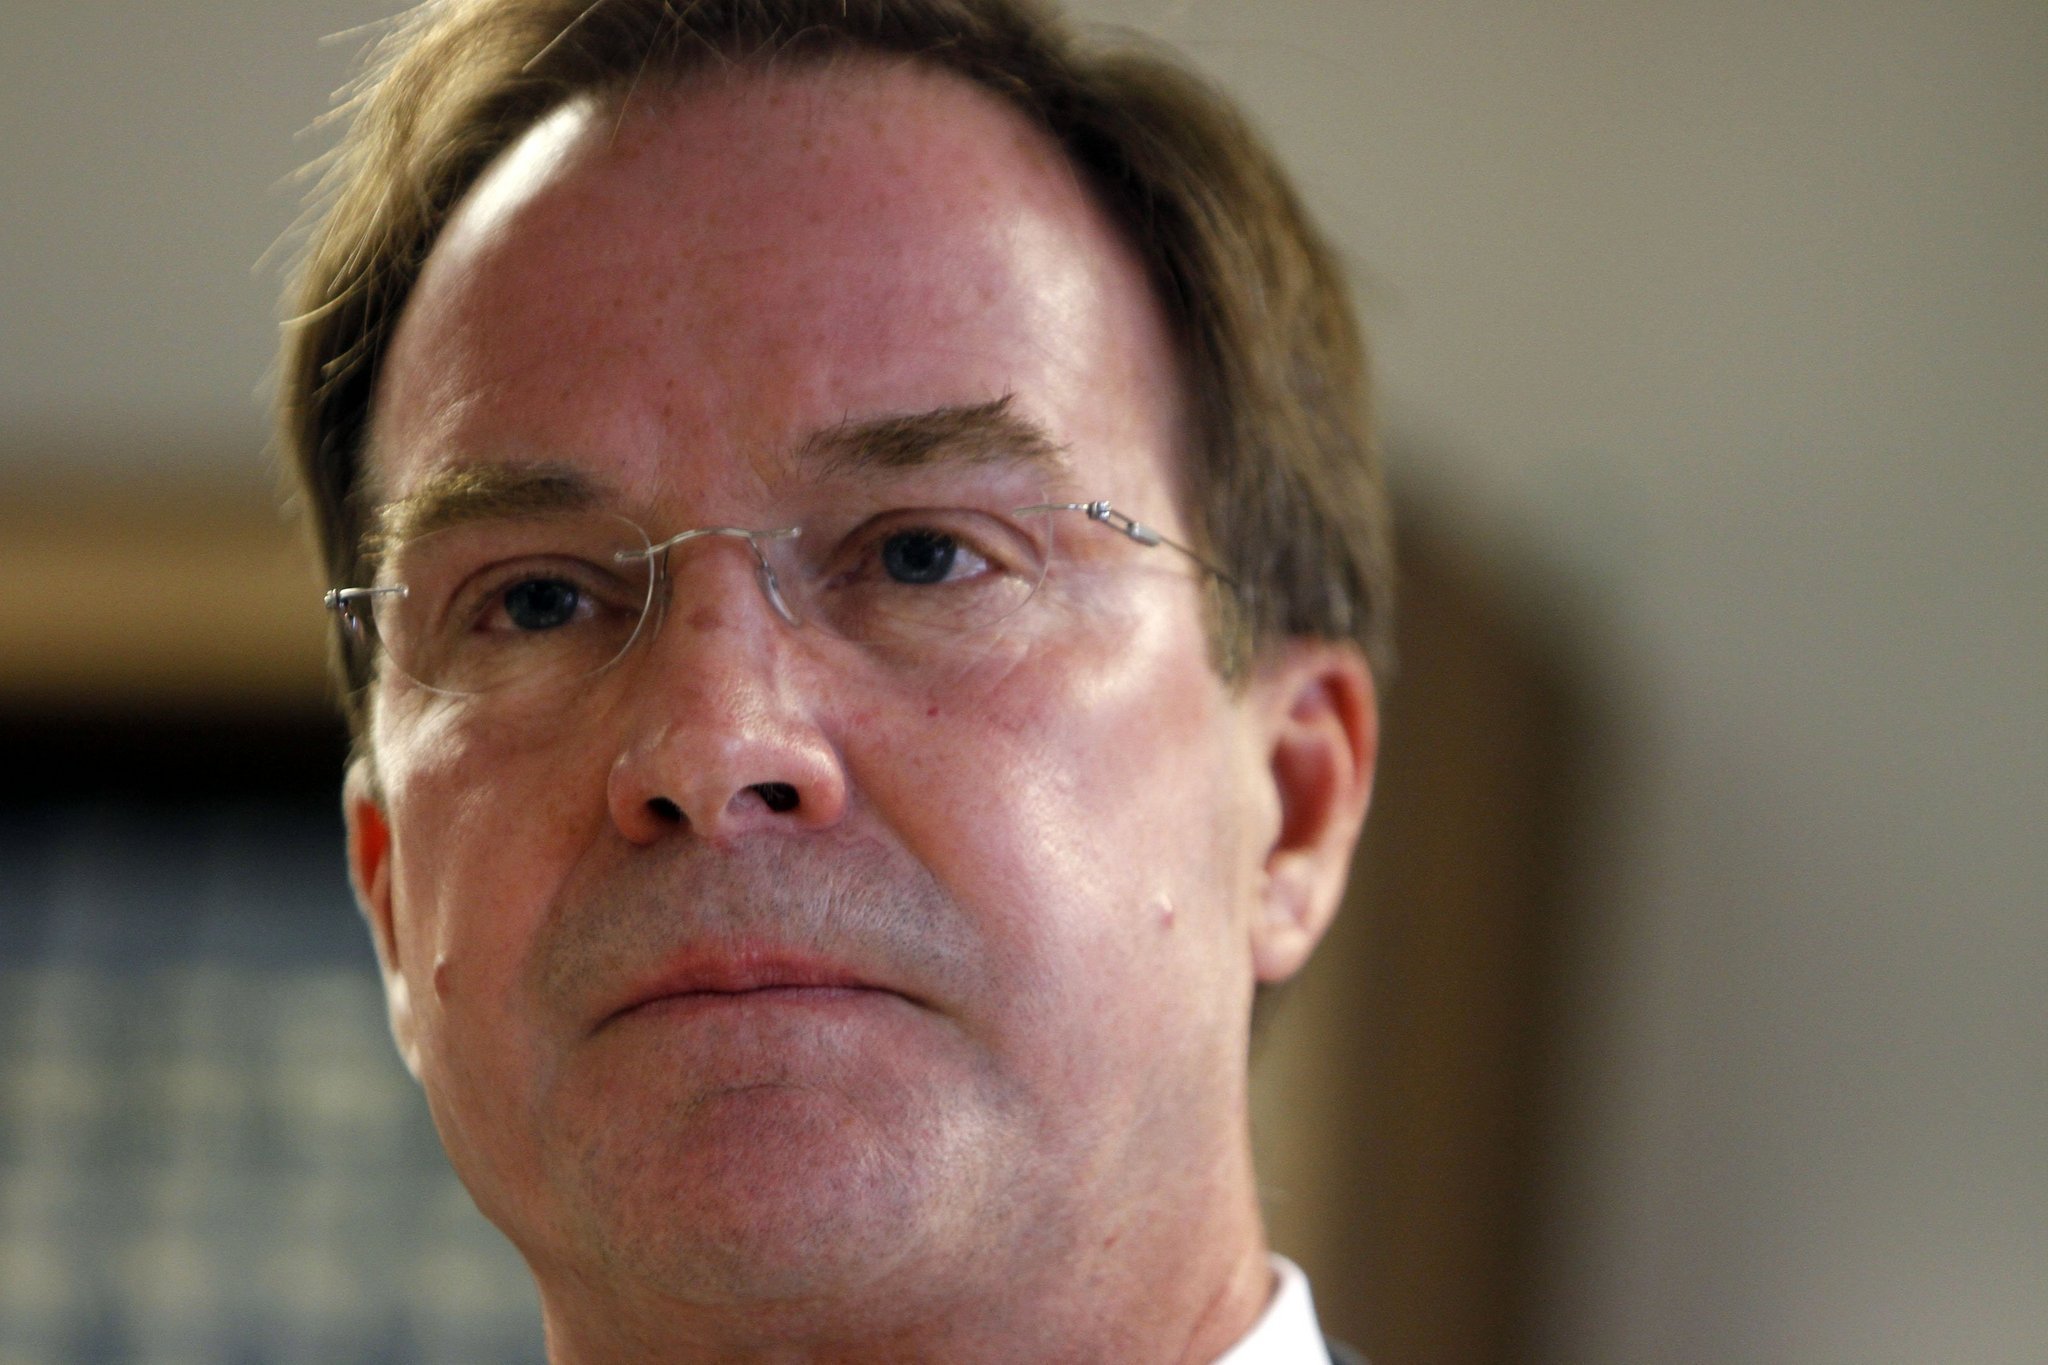 Michigan Attorney General Bill Schuette is drawing heat for aggressively defending a lawsuit by young prison inmates who say they were sexually assaulted by adult prisoners. Some critics say the state should look to settle. 